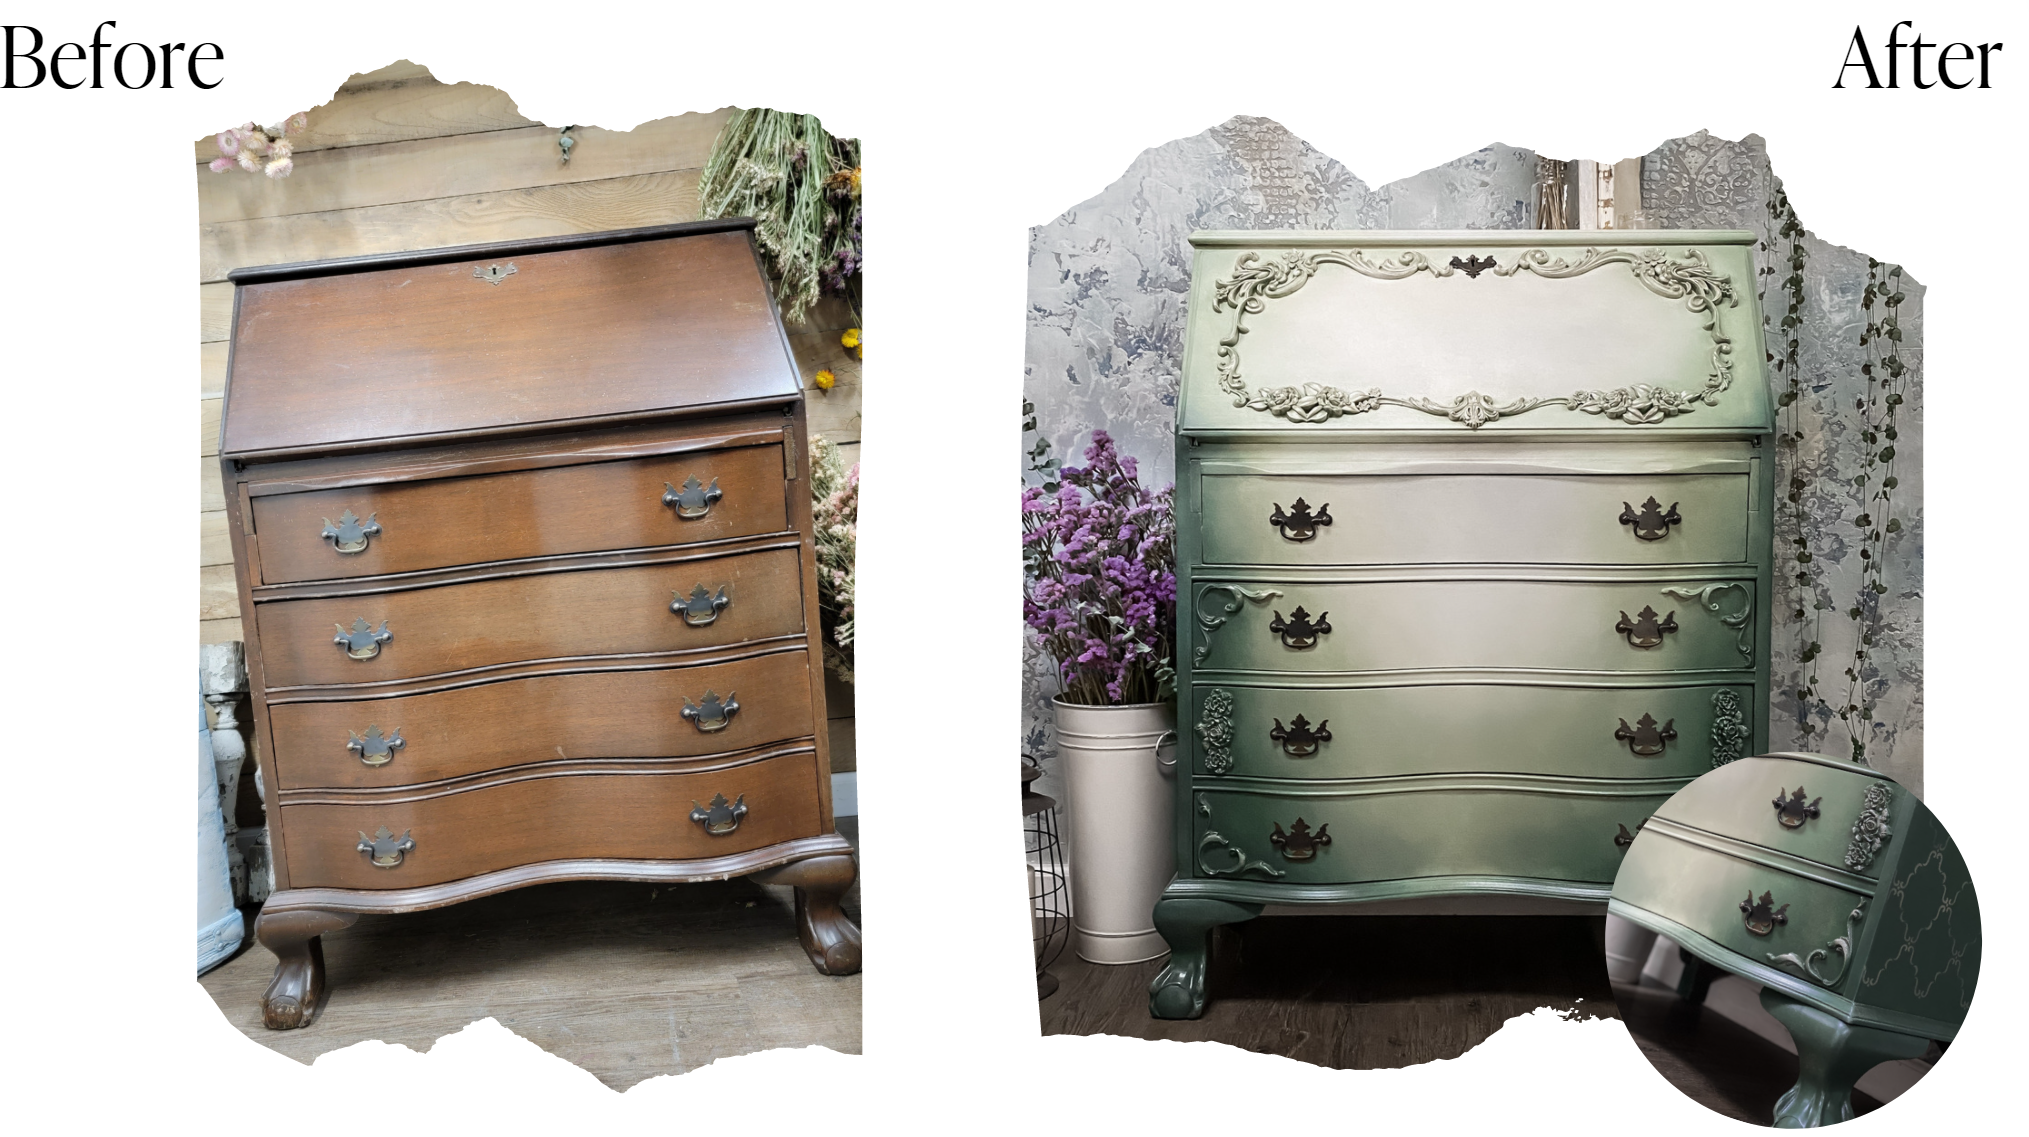 before and after furniture makeover blog banner - get the look with Country Chic Paint Green ombre blended ornate antique secretary desk by Weathered Hearts Designs